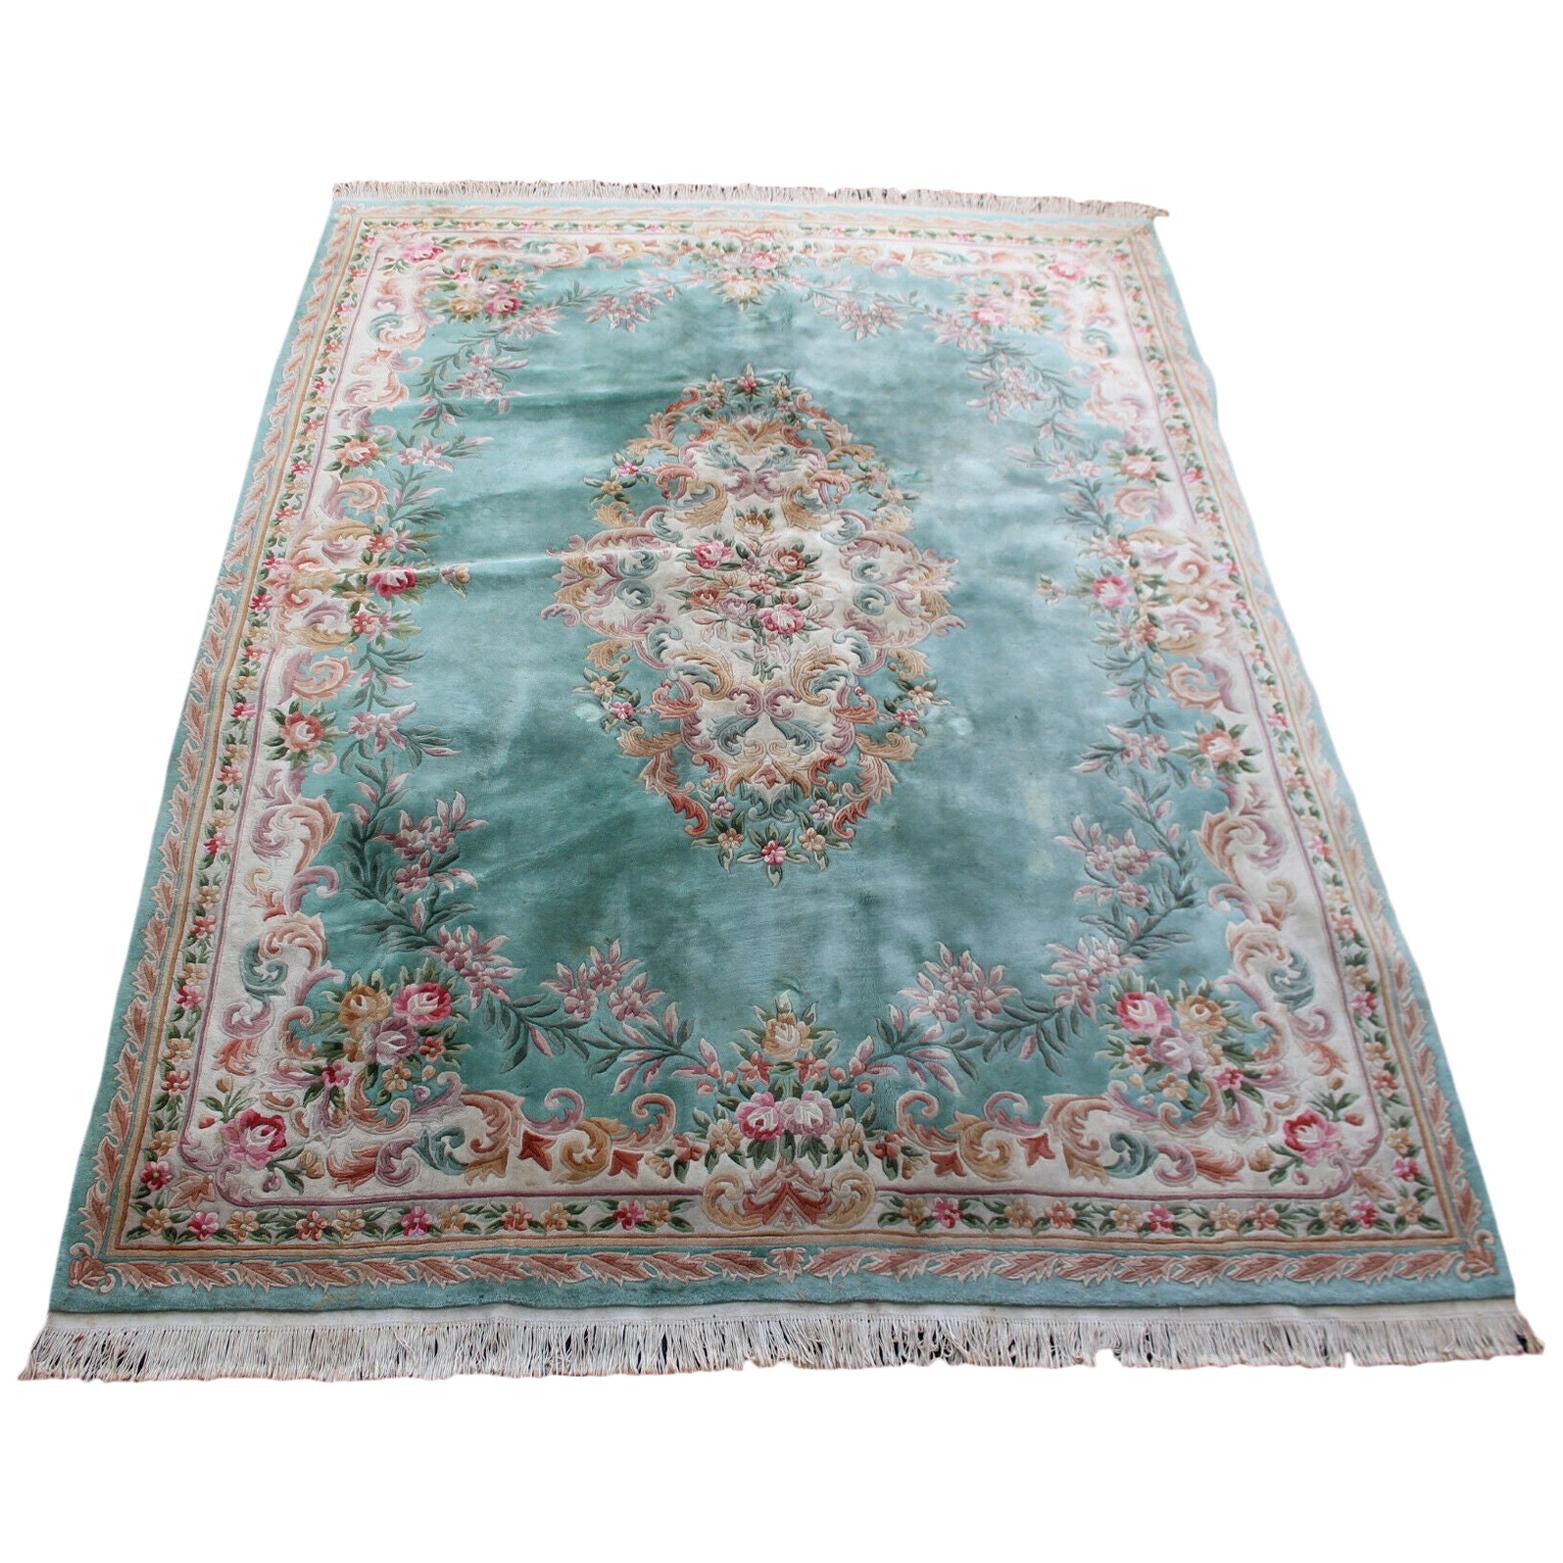 Large Chinese Rug Aubusson Carpet Savonnerie Thick Wool Pile For Sale